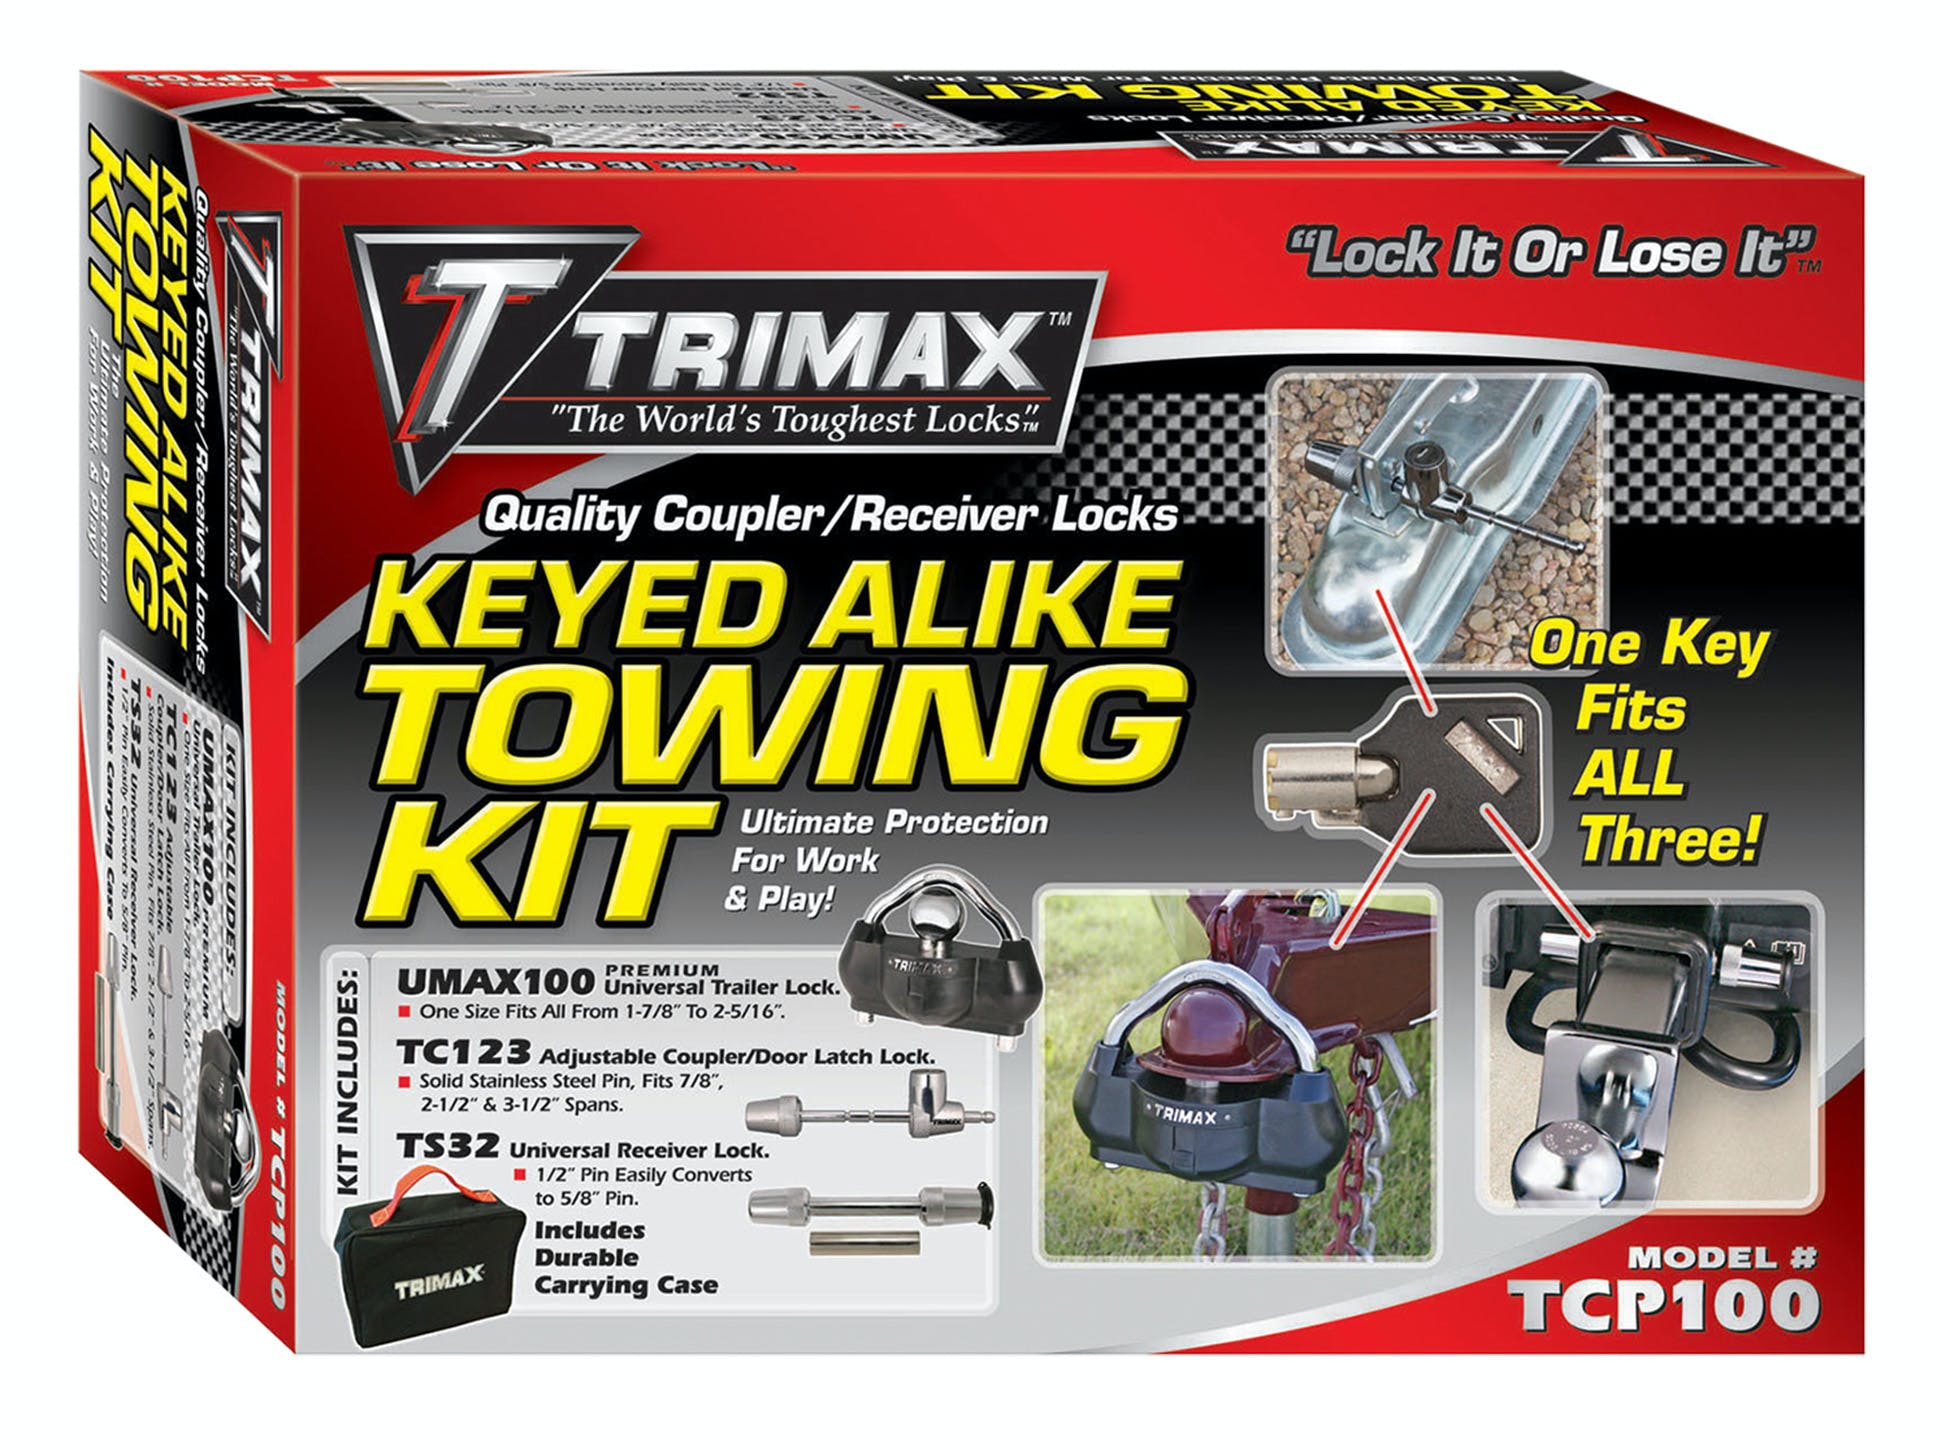 TRIMAX TCP100 All Keyed Alike Combo Pack Set Includes UMAX100,TC123,TS32 and Carrying Case